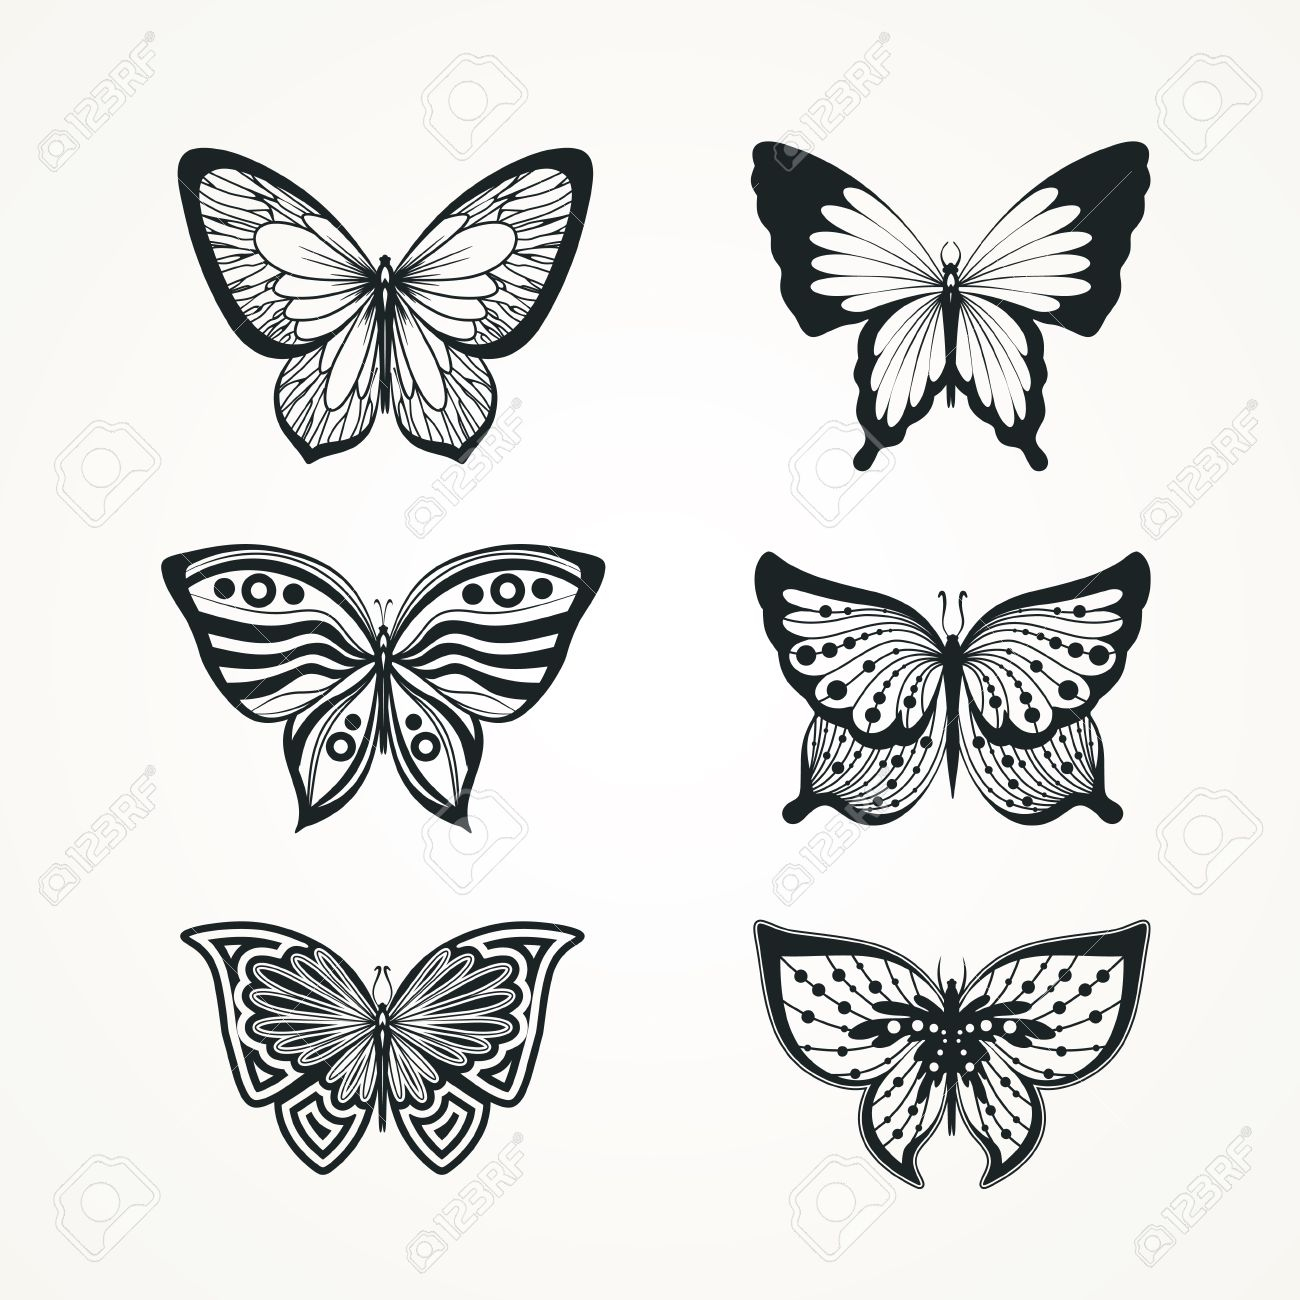 Collection Of Stylized Butterfly Tattoo Royalty Free Cliparts pertaining to dimensions 1300 X 1300